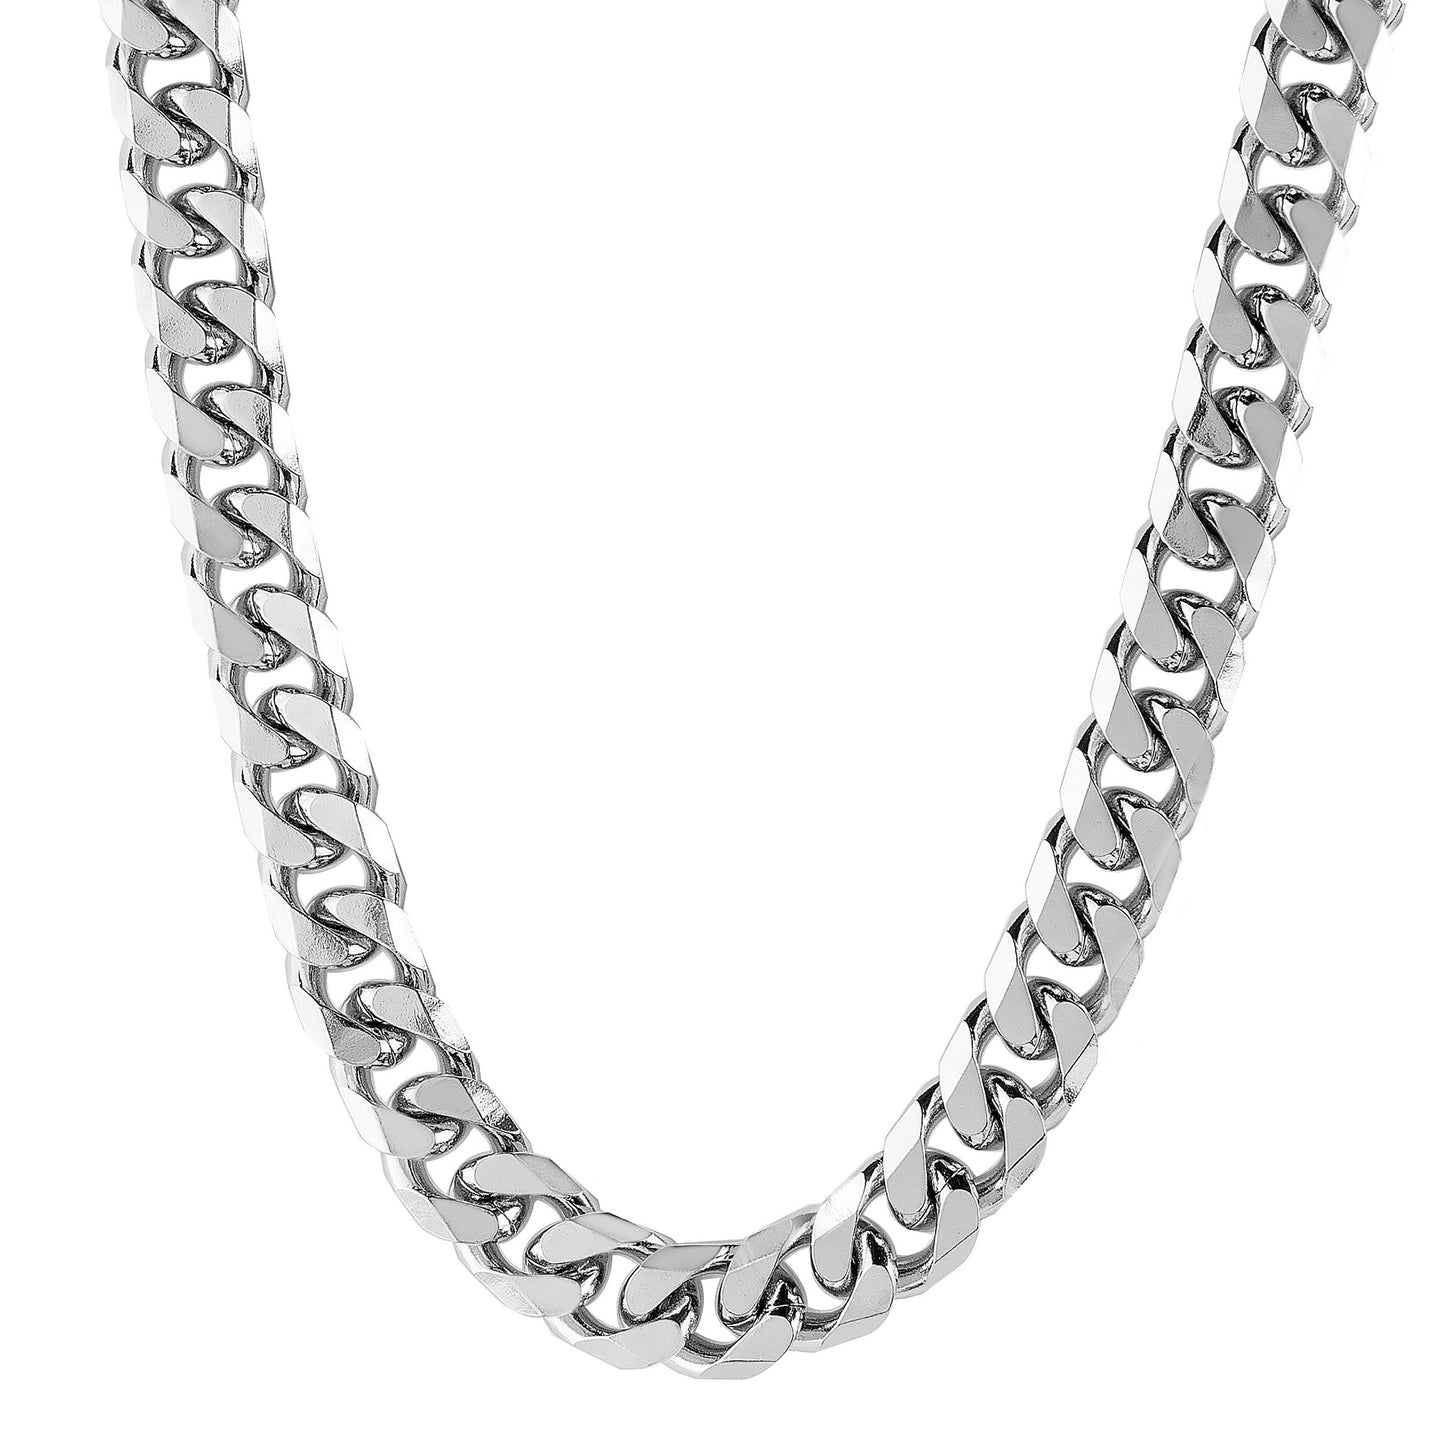 Men's Polished Beveled Cuban Link Chain Stainless Steel Necklace (6mm) - 27"